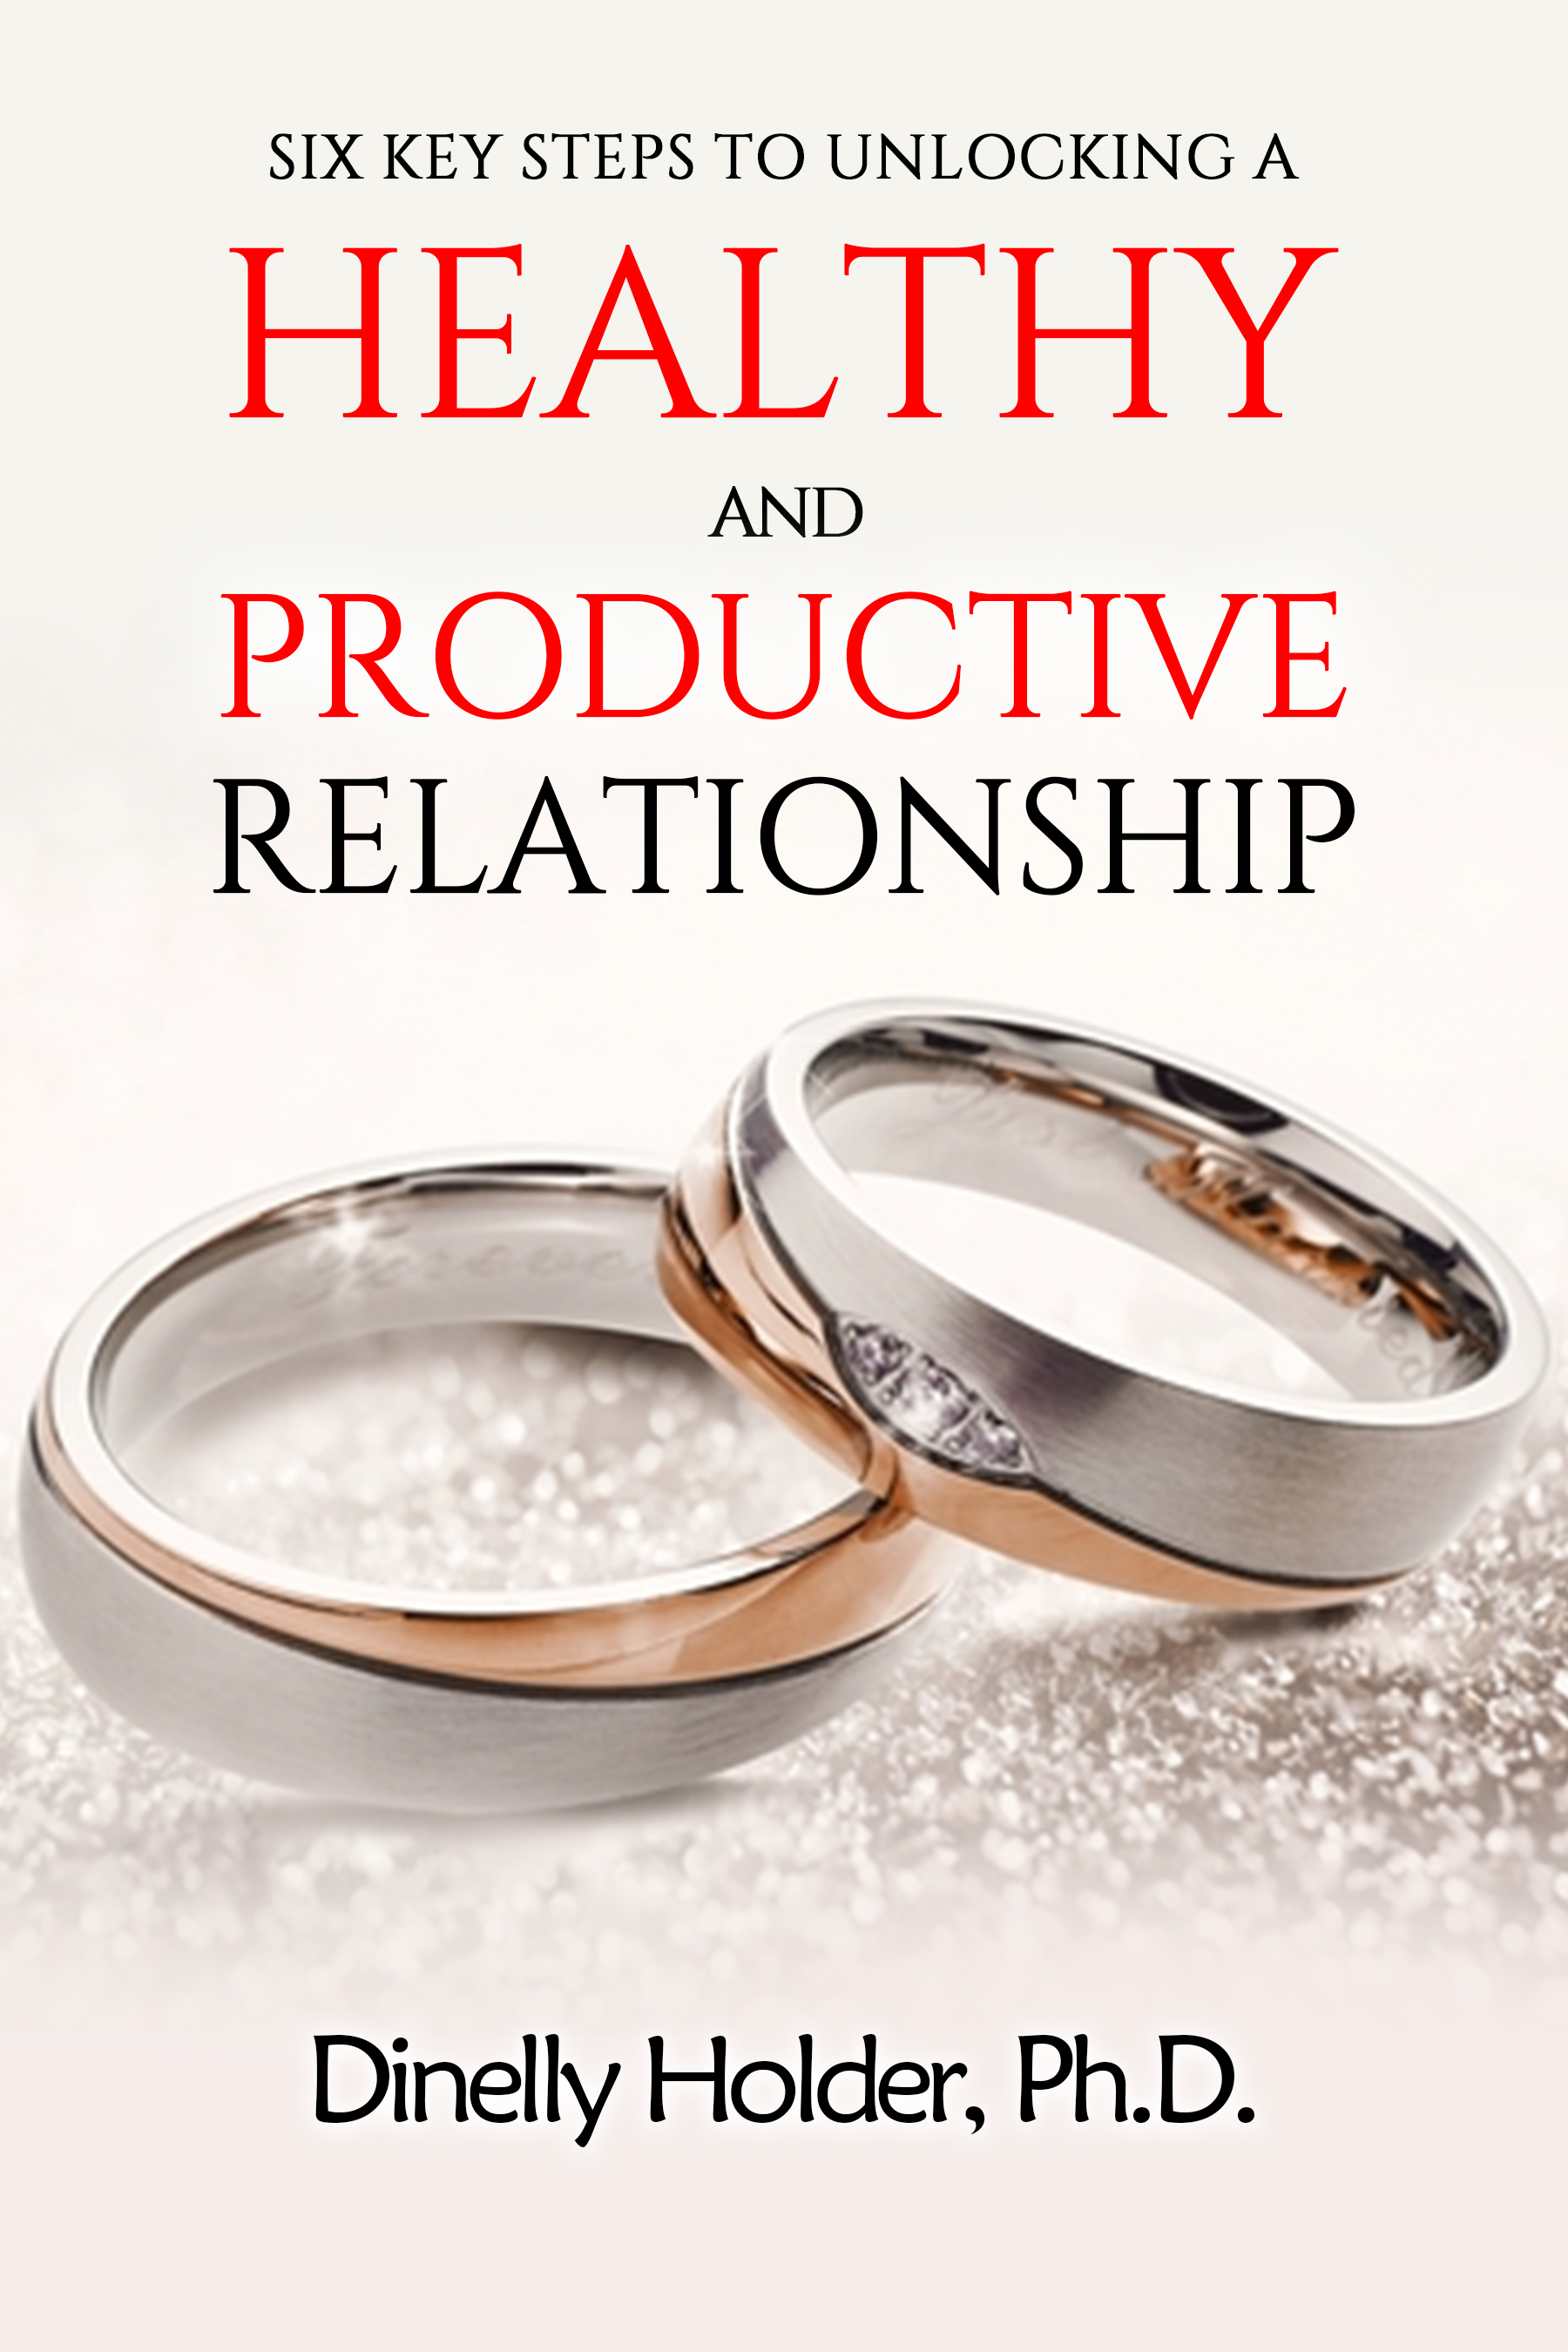 Six Key Steps to Unlocking a Healthy and Productive Relationship by Dinelly Holder